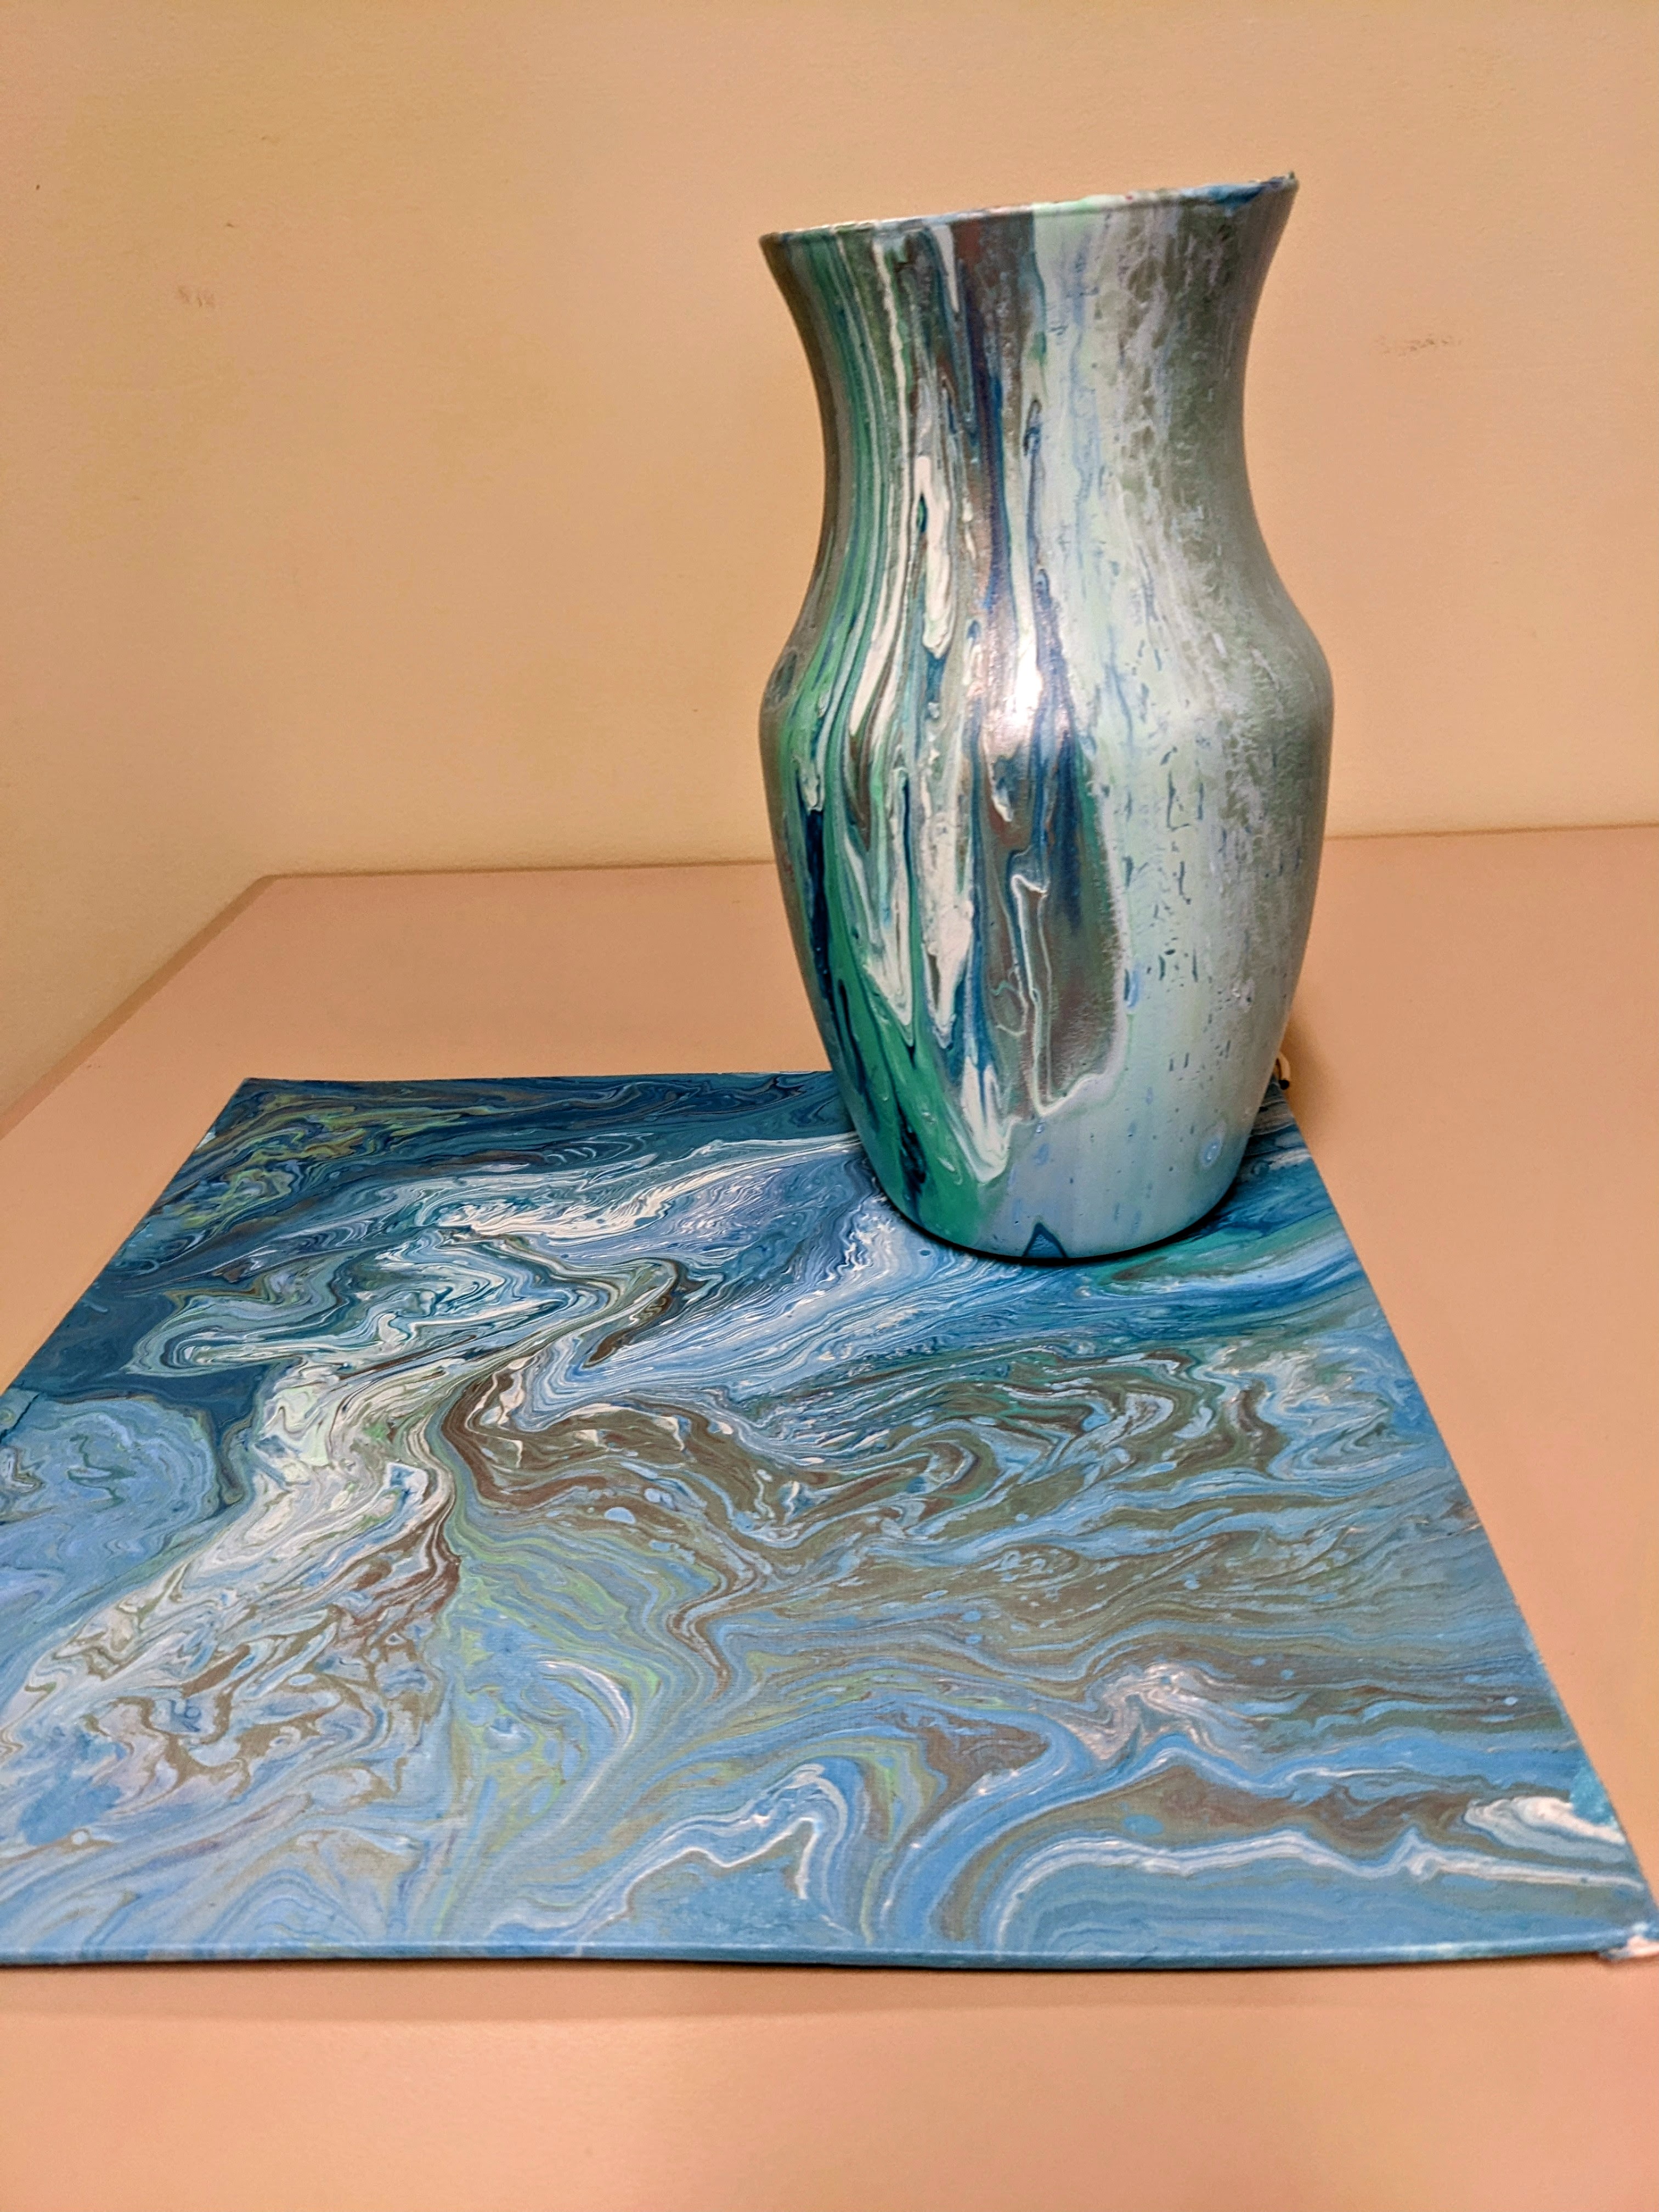 Pour painted vase and canvas